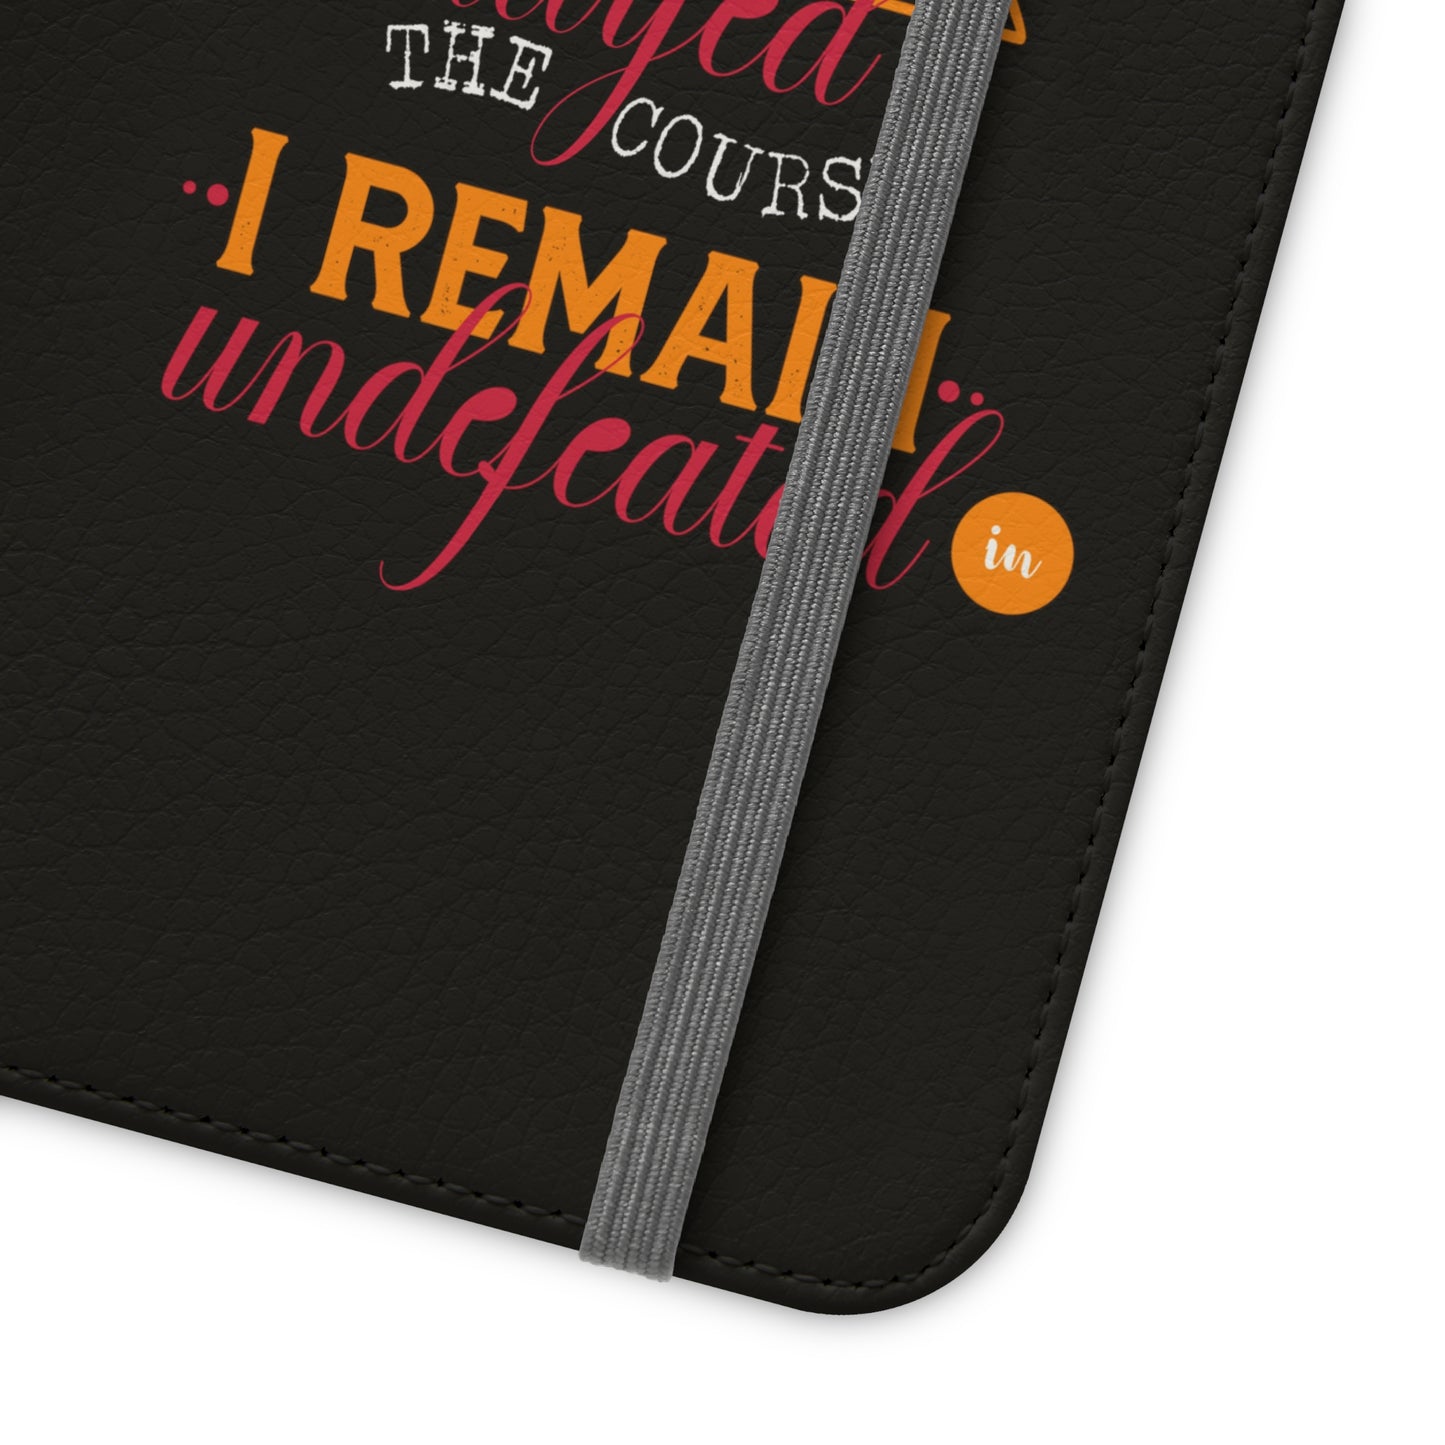 I Have Persevered I Have Stayed The Course I Remain Undefeated In Christ Phone Flip Cases